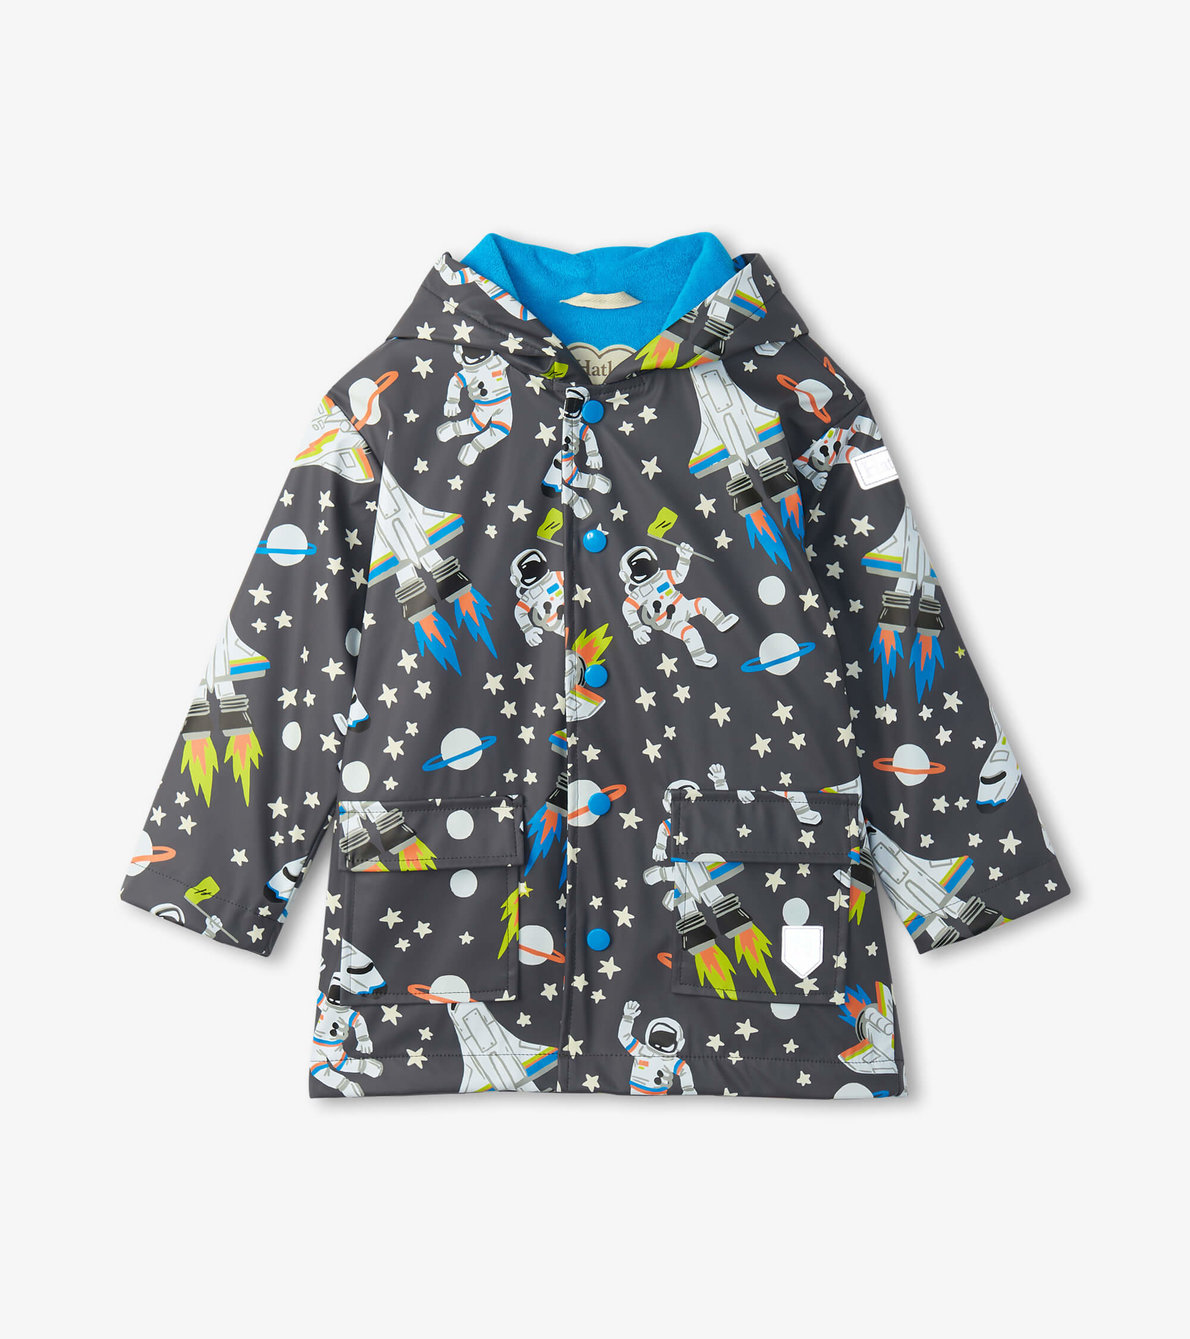 View larger image of Astronaut Colour Changing Kids Raincoat